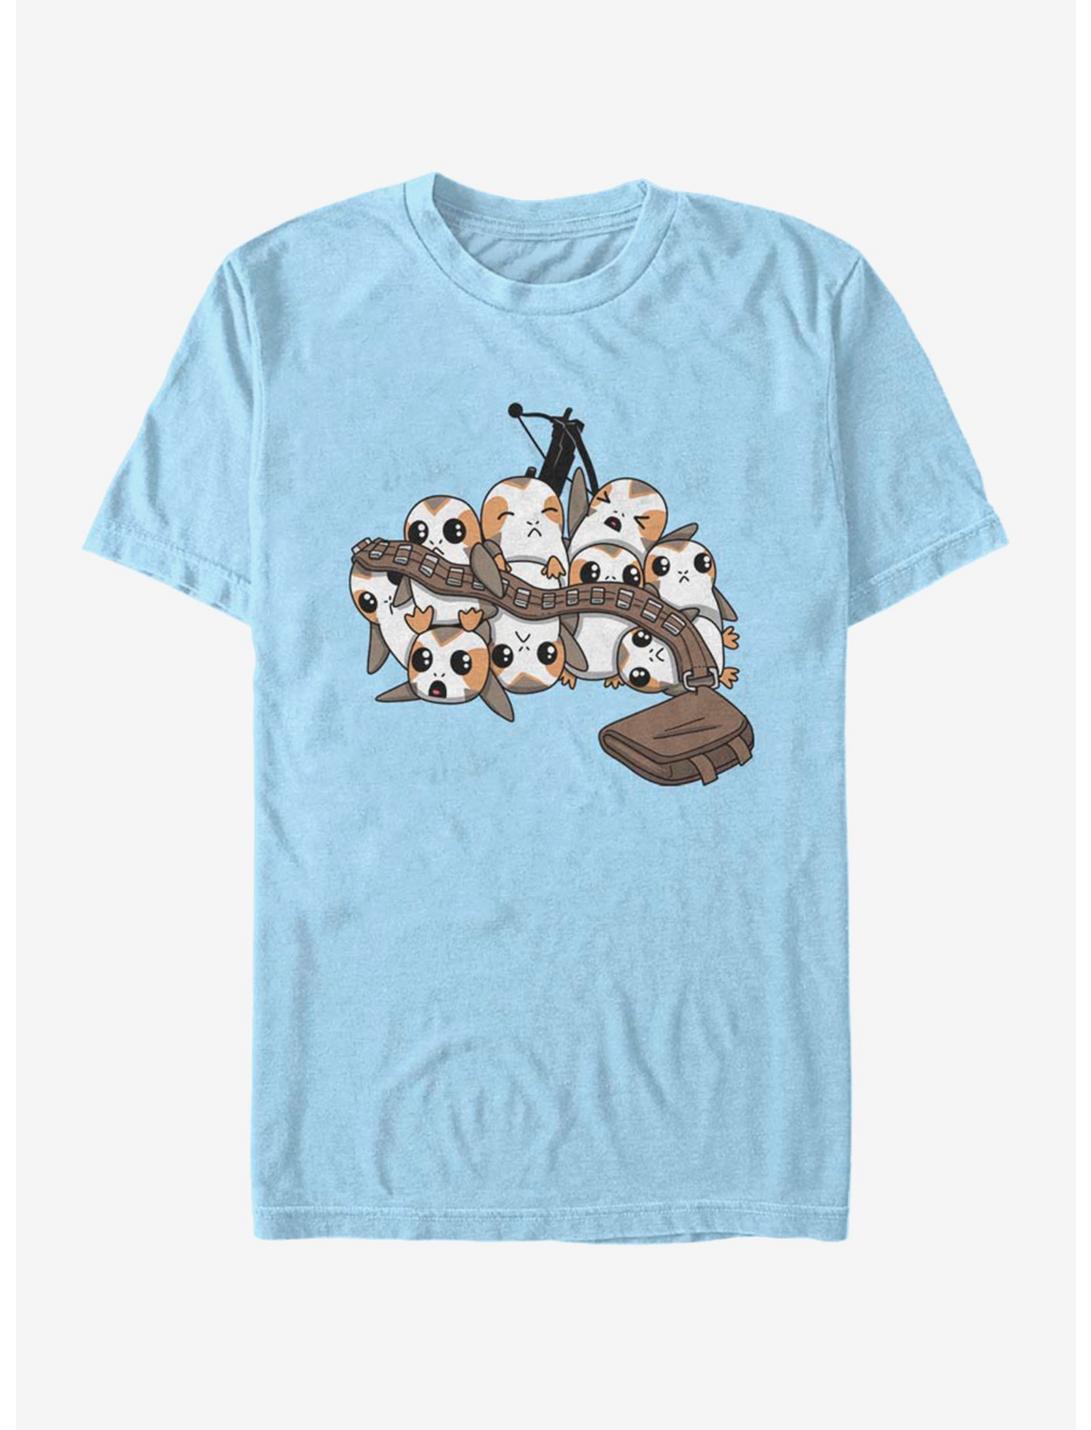 Star Wars Porg Pile and Chewbacca Accessories T-Shirt, LT BLUE, hi-res